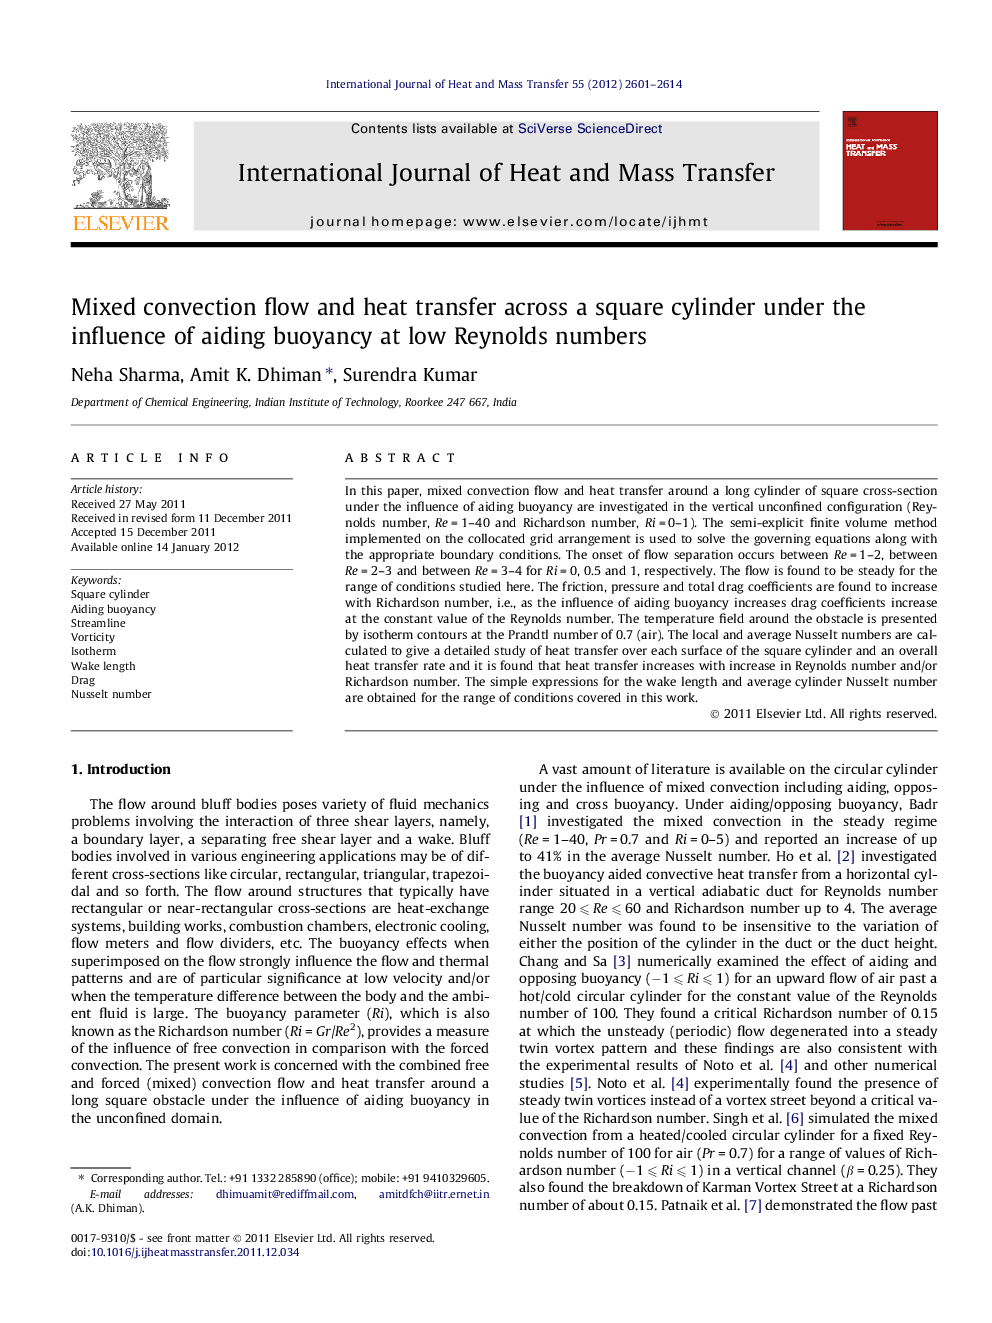 Mixed convection flow and heat transfer across a square cylinder under the influence of aiding buoyancy at low Reynolds numbers